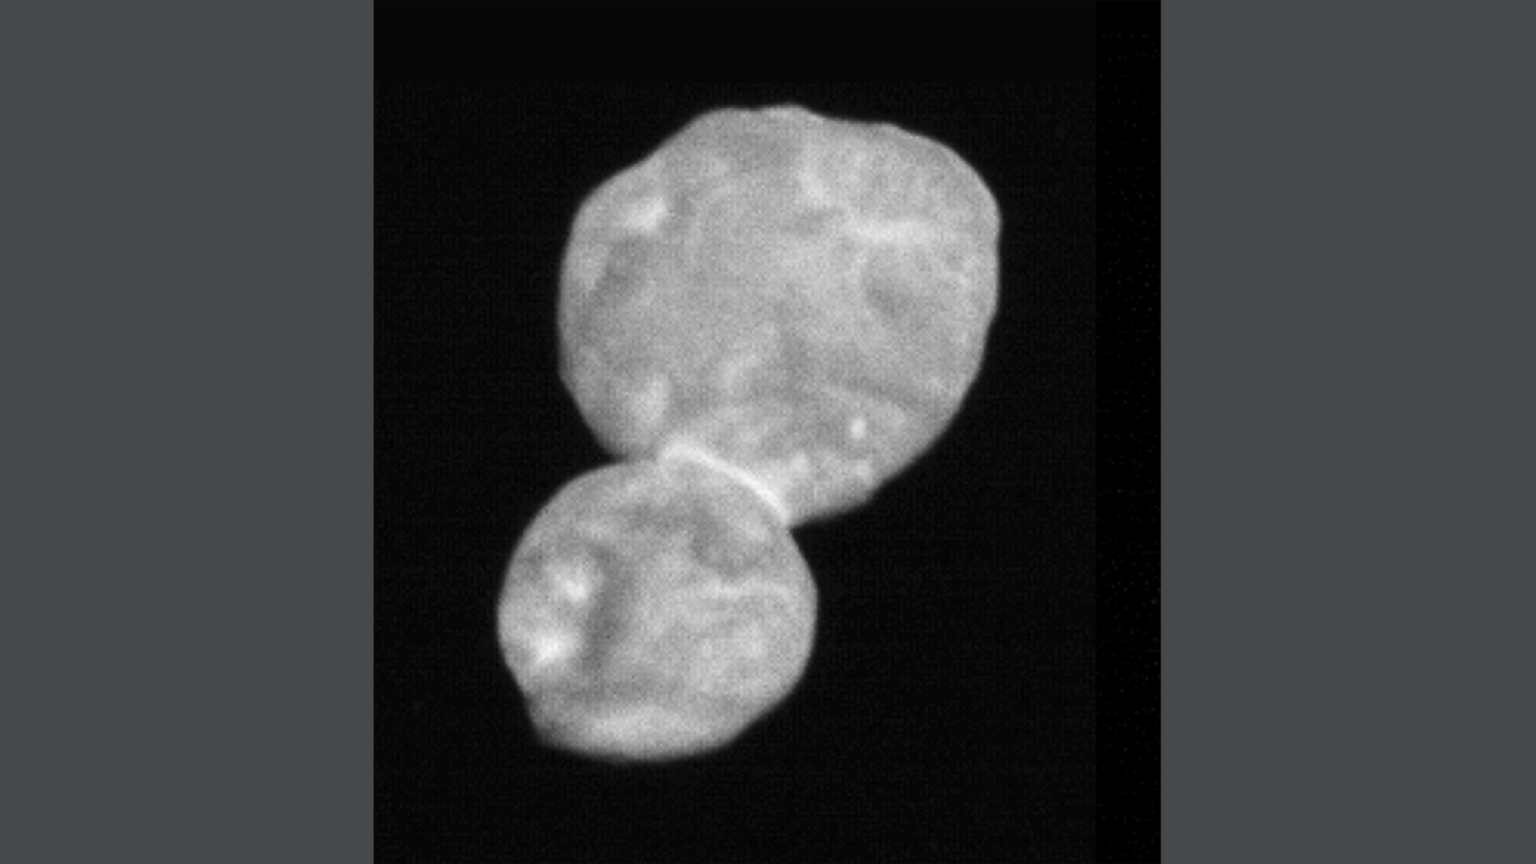 This image taken by the Long-Range Reconnaissance Imager (LORRI) is the most detailed of Ultima Thule returned so far by the New Horizons spacecraft. (Credit: NASA/Johns Hopkins University Applied Physics Laboratory/Southwest Research Institute)